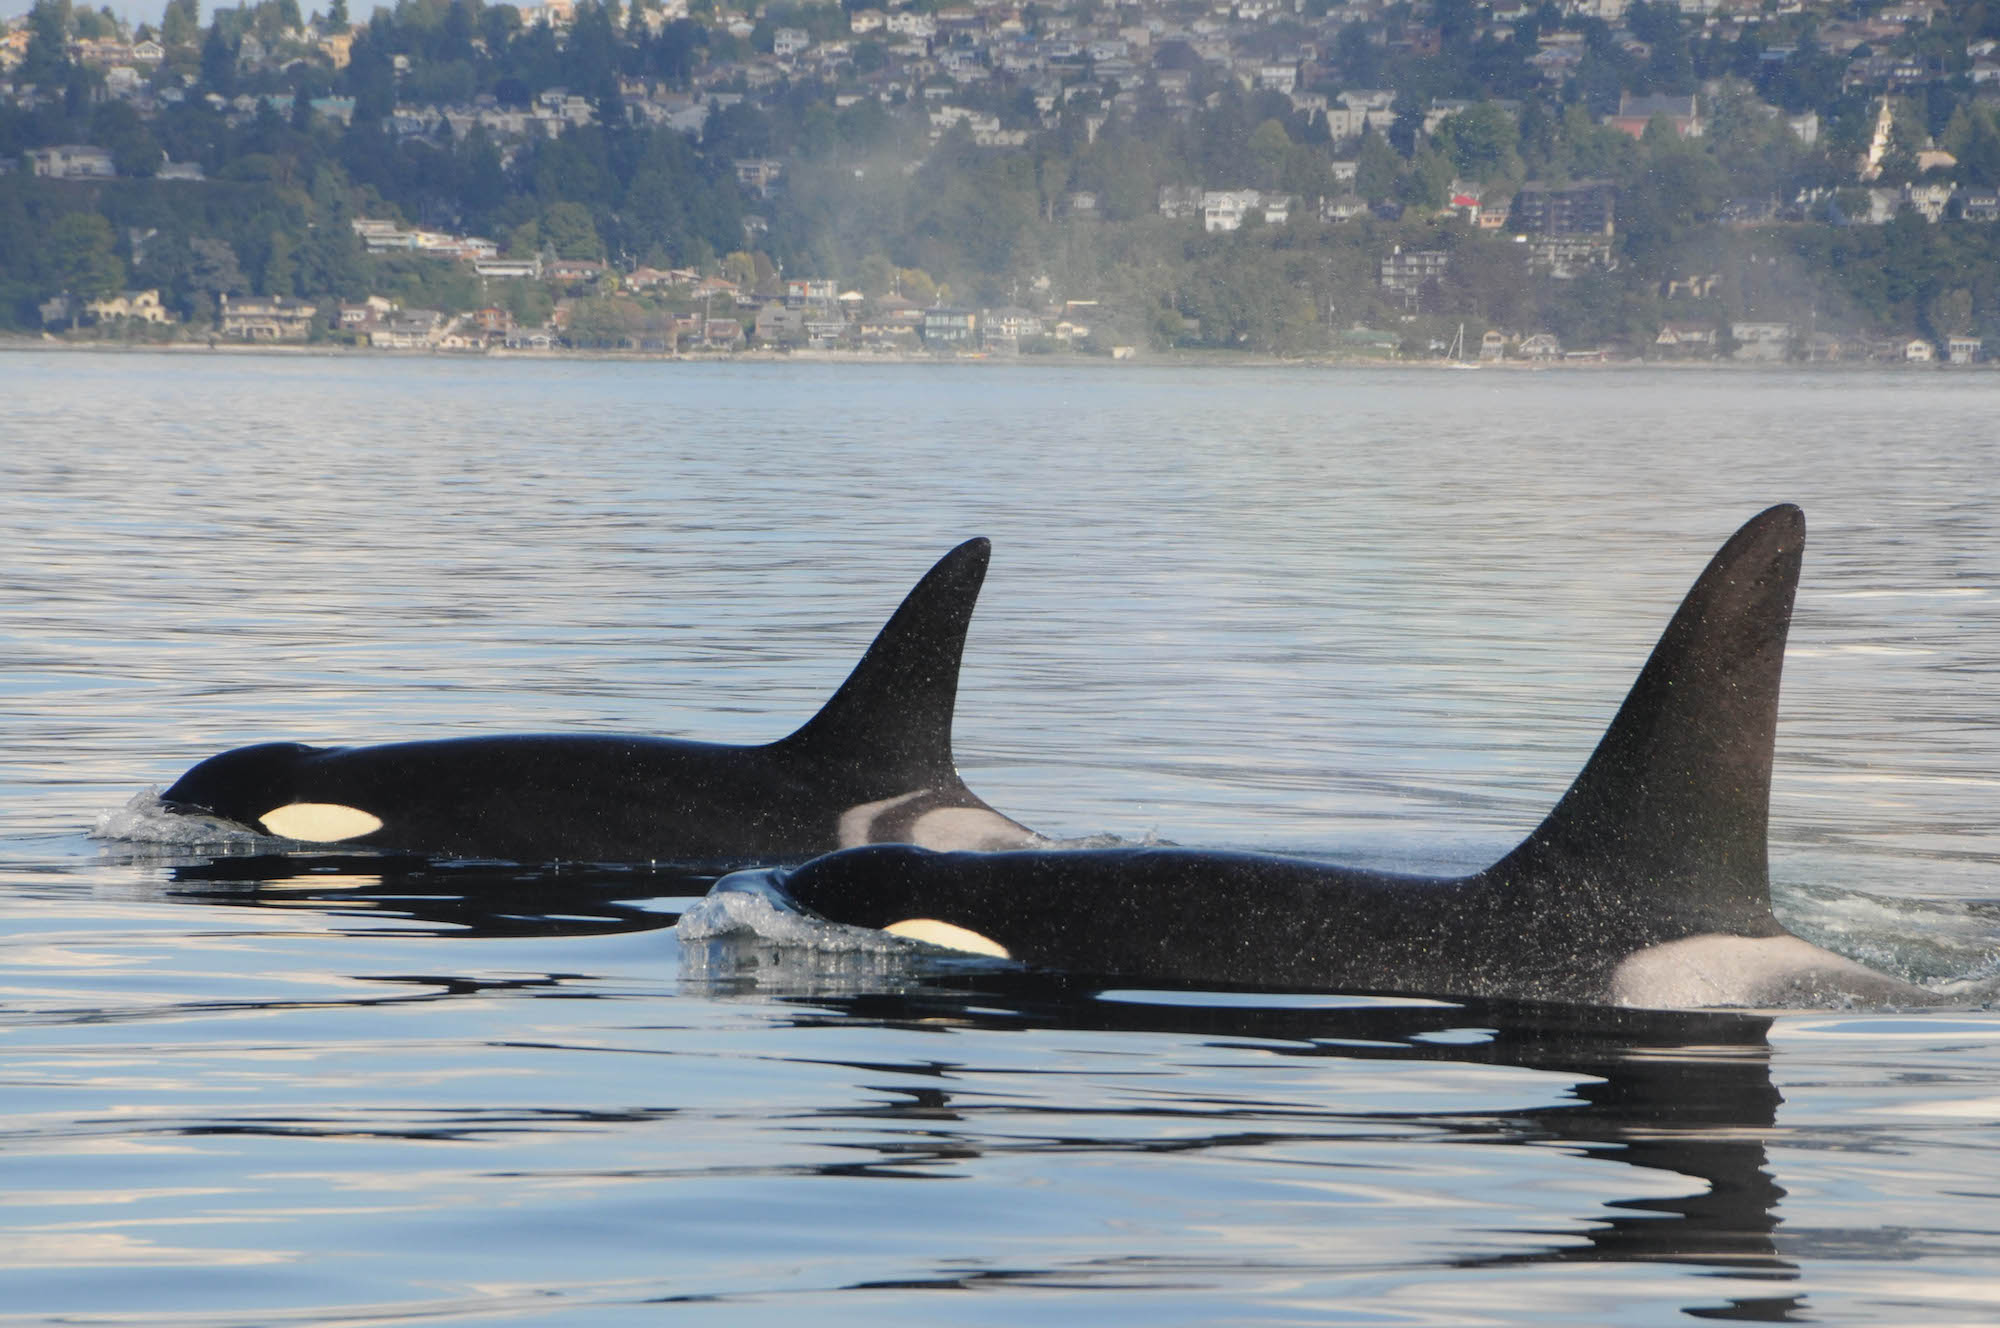 Two Southern Resident killer whales partially surface in the waters, displaying their iconic black and white dorsal fins